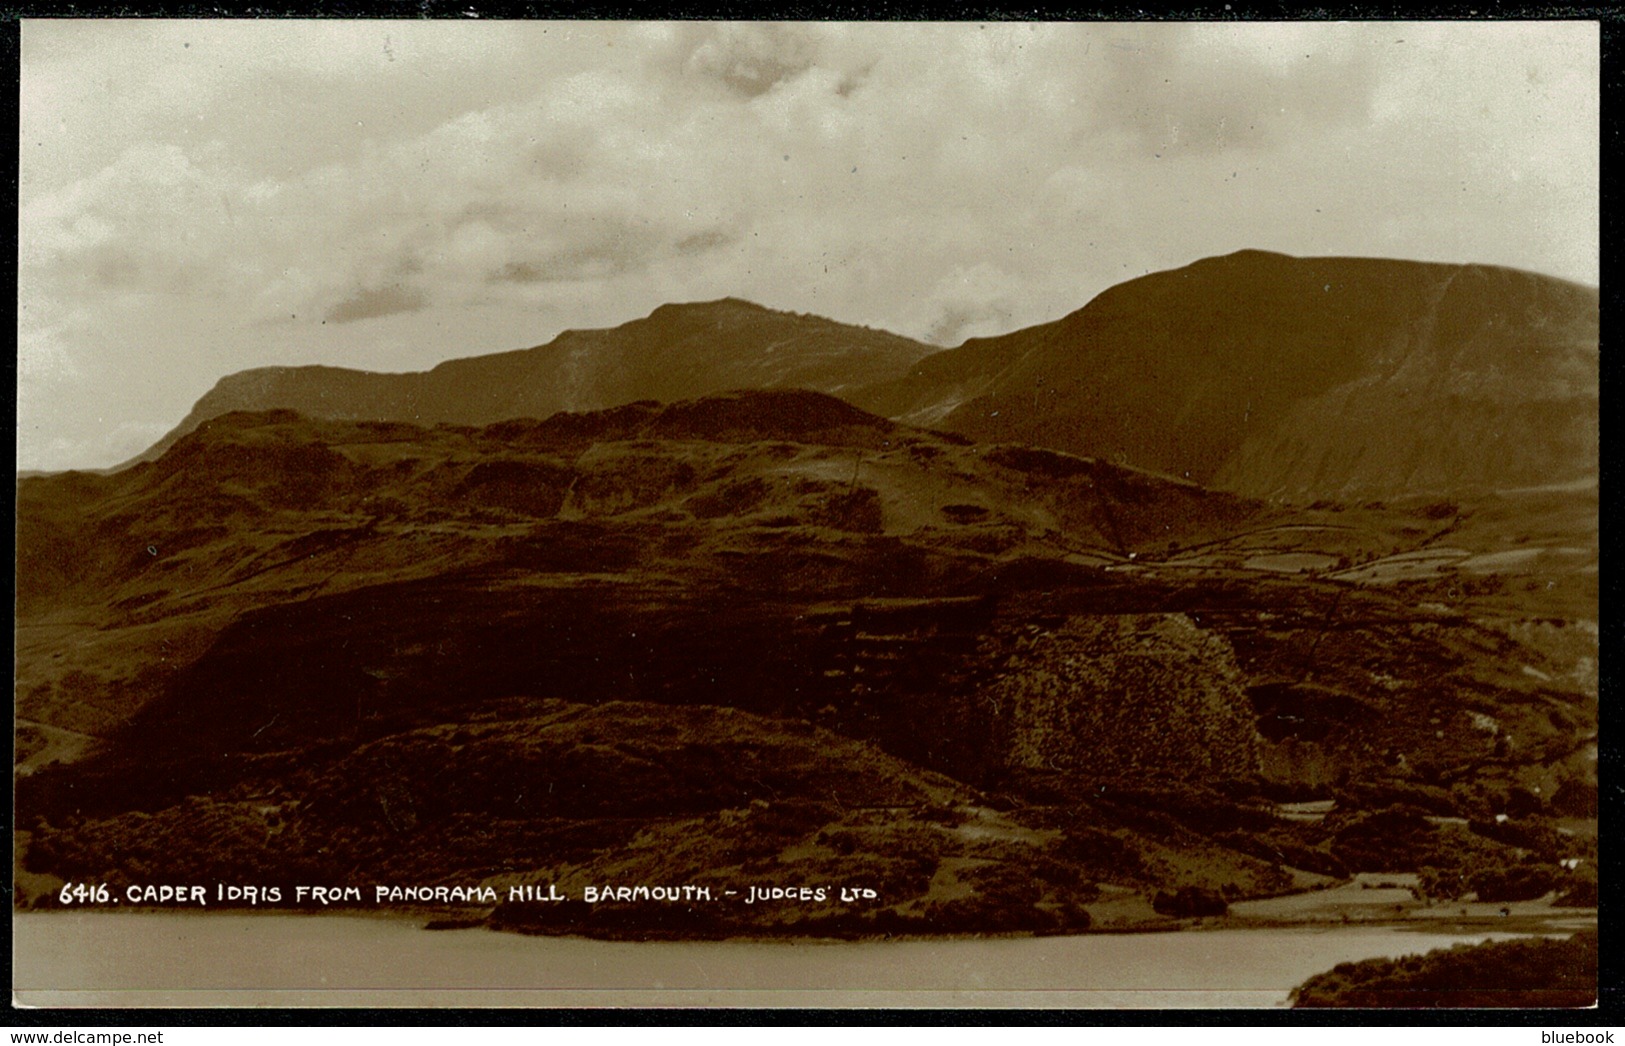 Ref 1271 - Judges Real Photo Postcard - Cader Idris From Panorama Hill Barmouth - Merionethshire Wales - Merionethshire